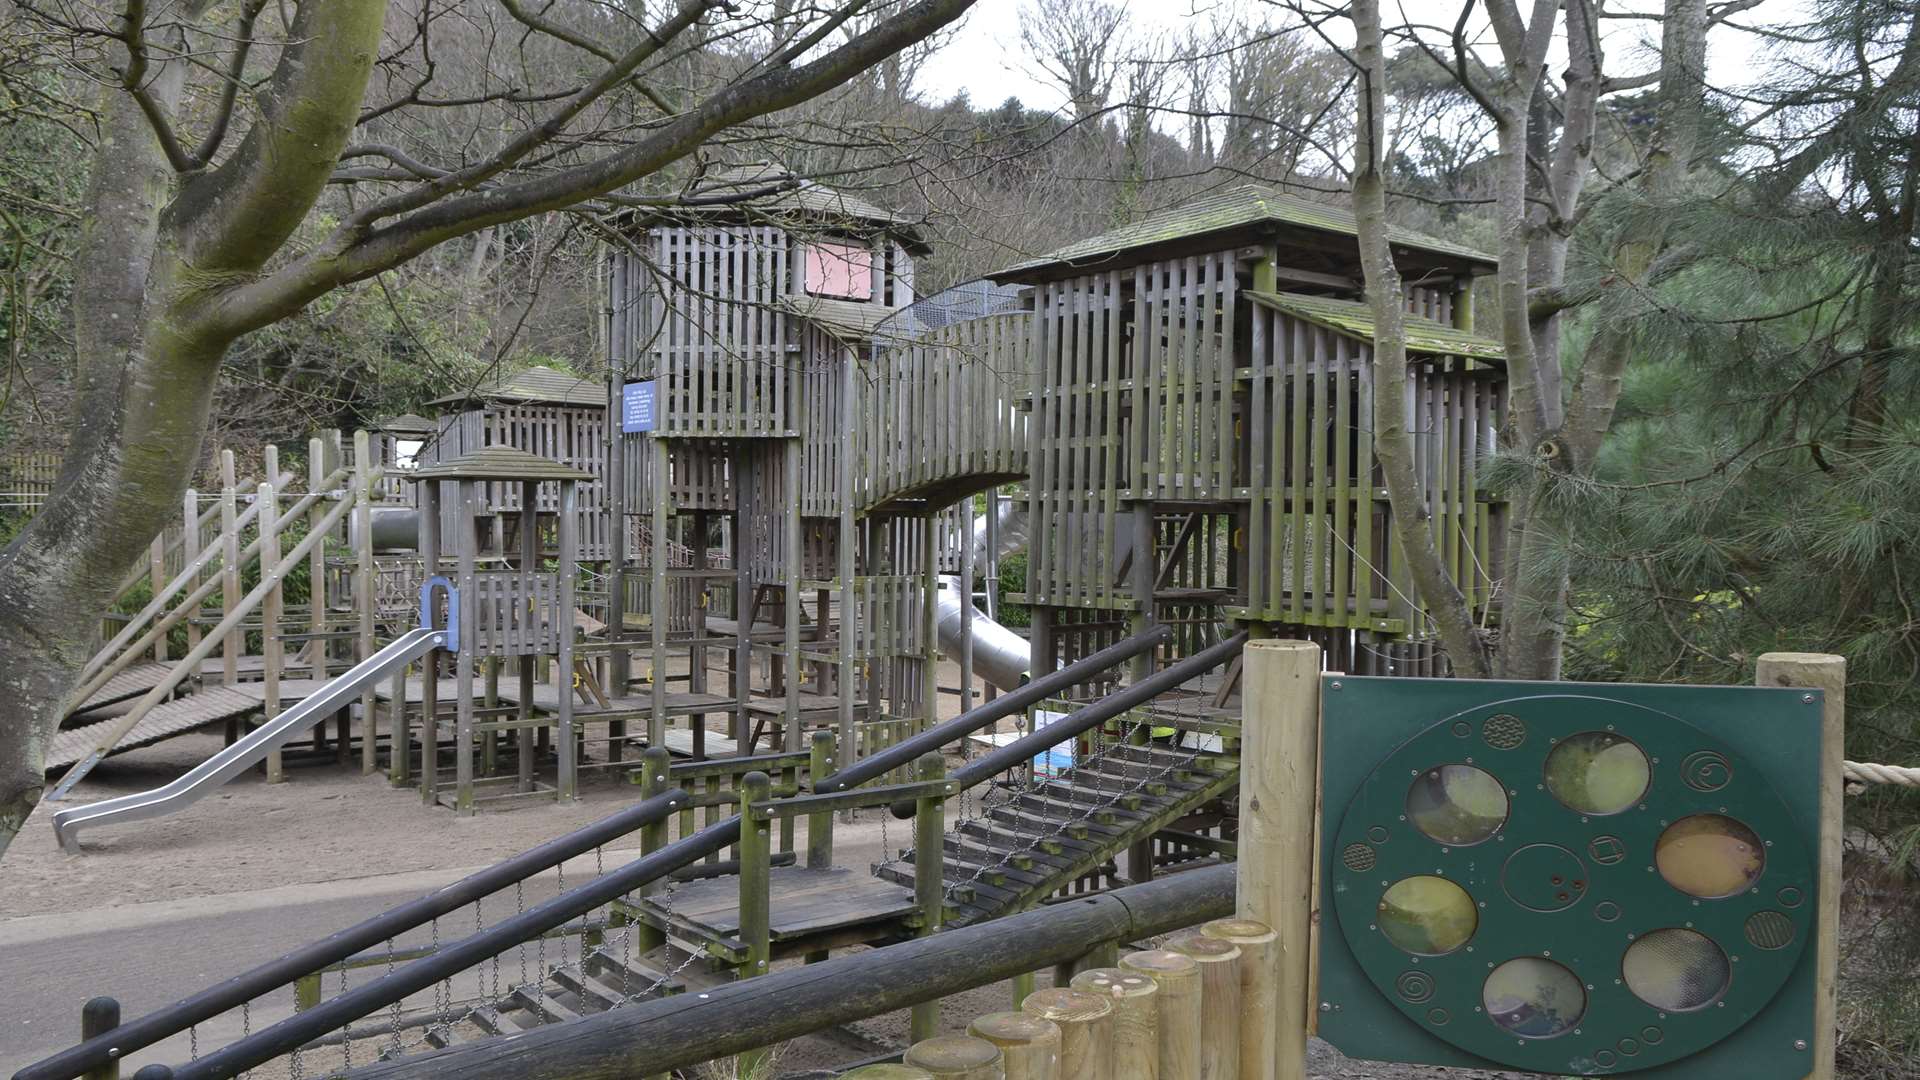 Folkestone is home to the largest adventure playground in the South East